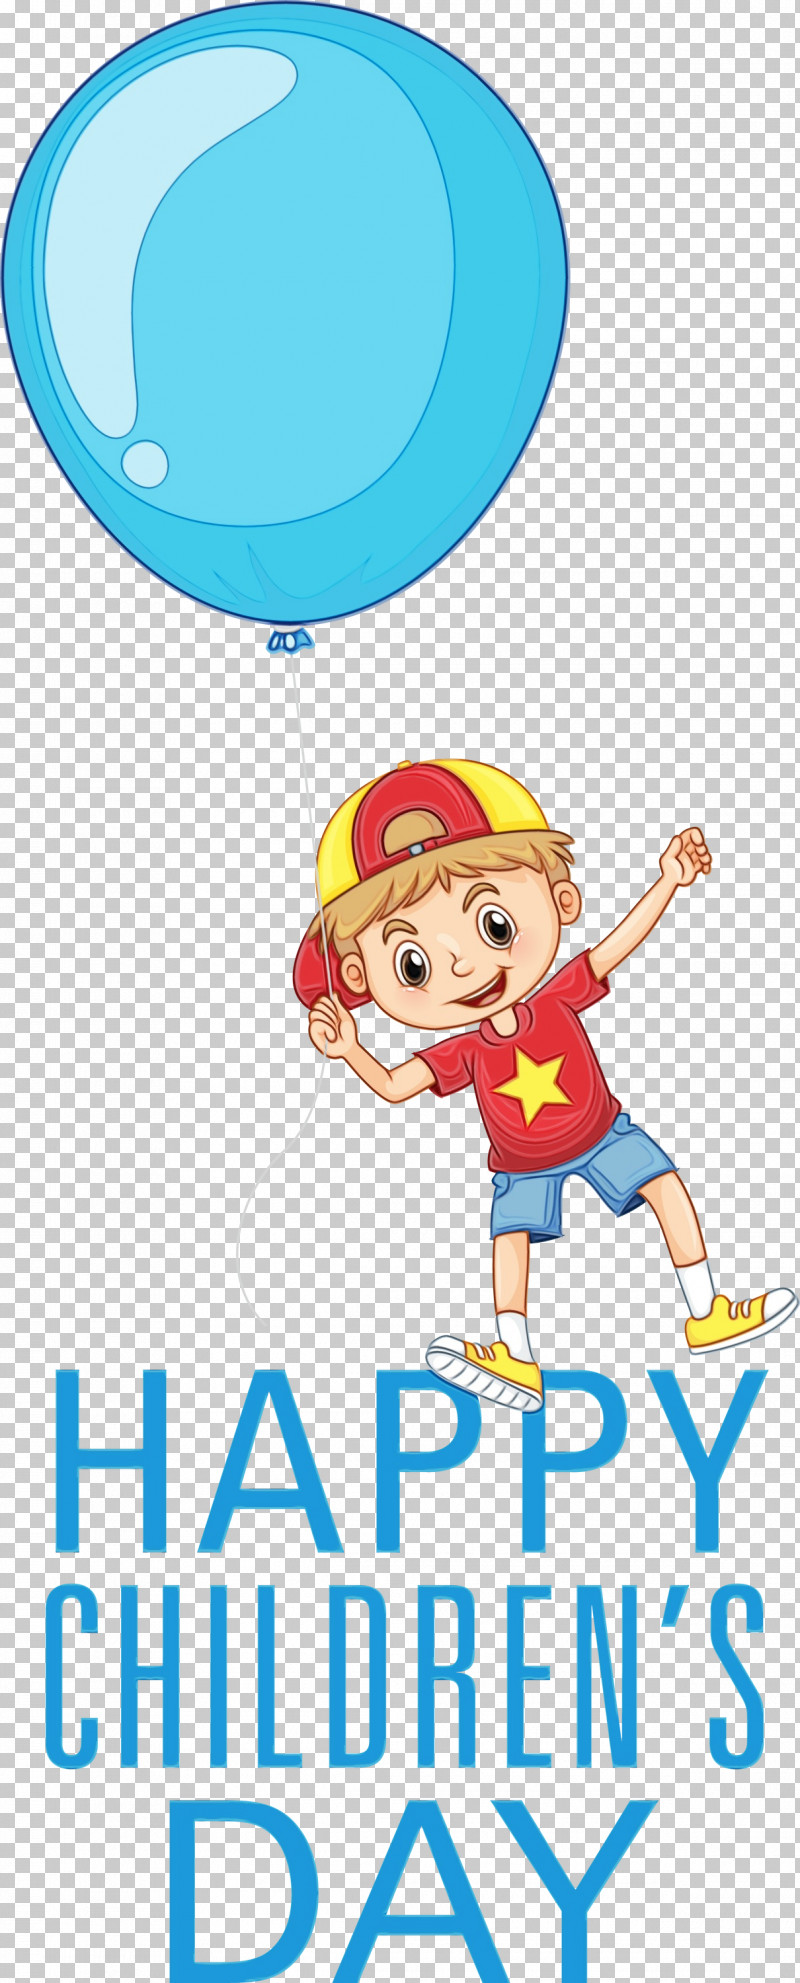 Samsung Samsung Galaxy A5 Human Cartoon PNG, Clipart, Behavior, Cartoon, Character, Happiness, Happy Childrens Day Free PNG Download